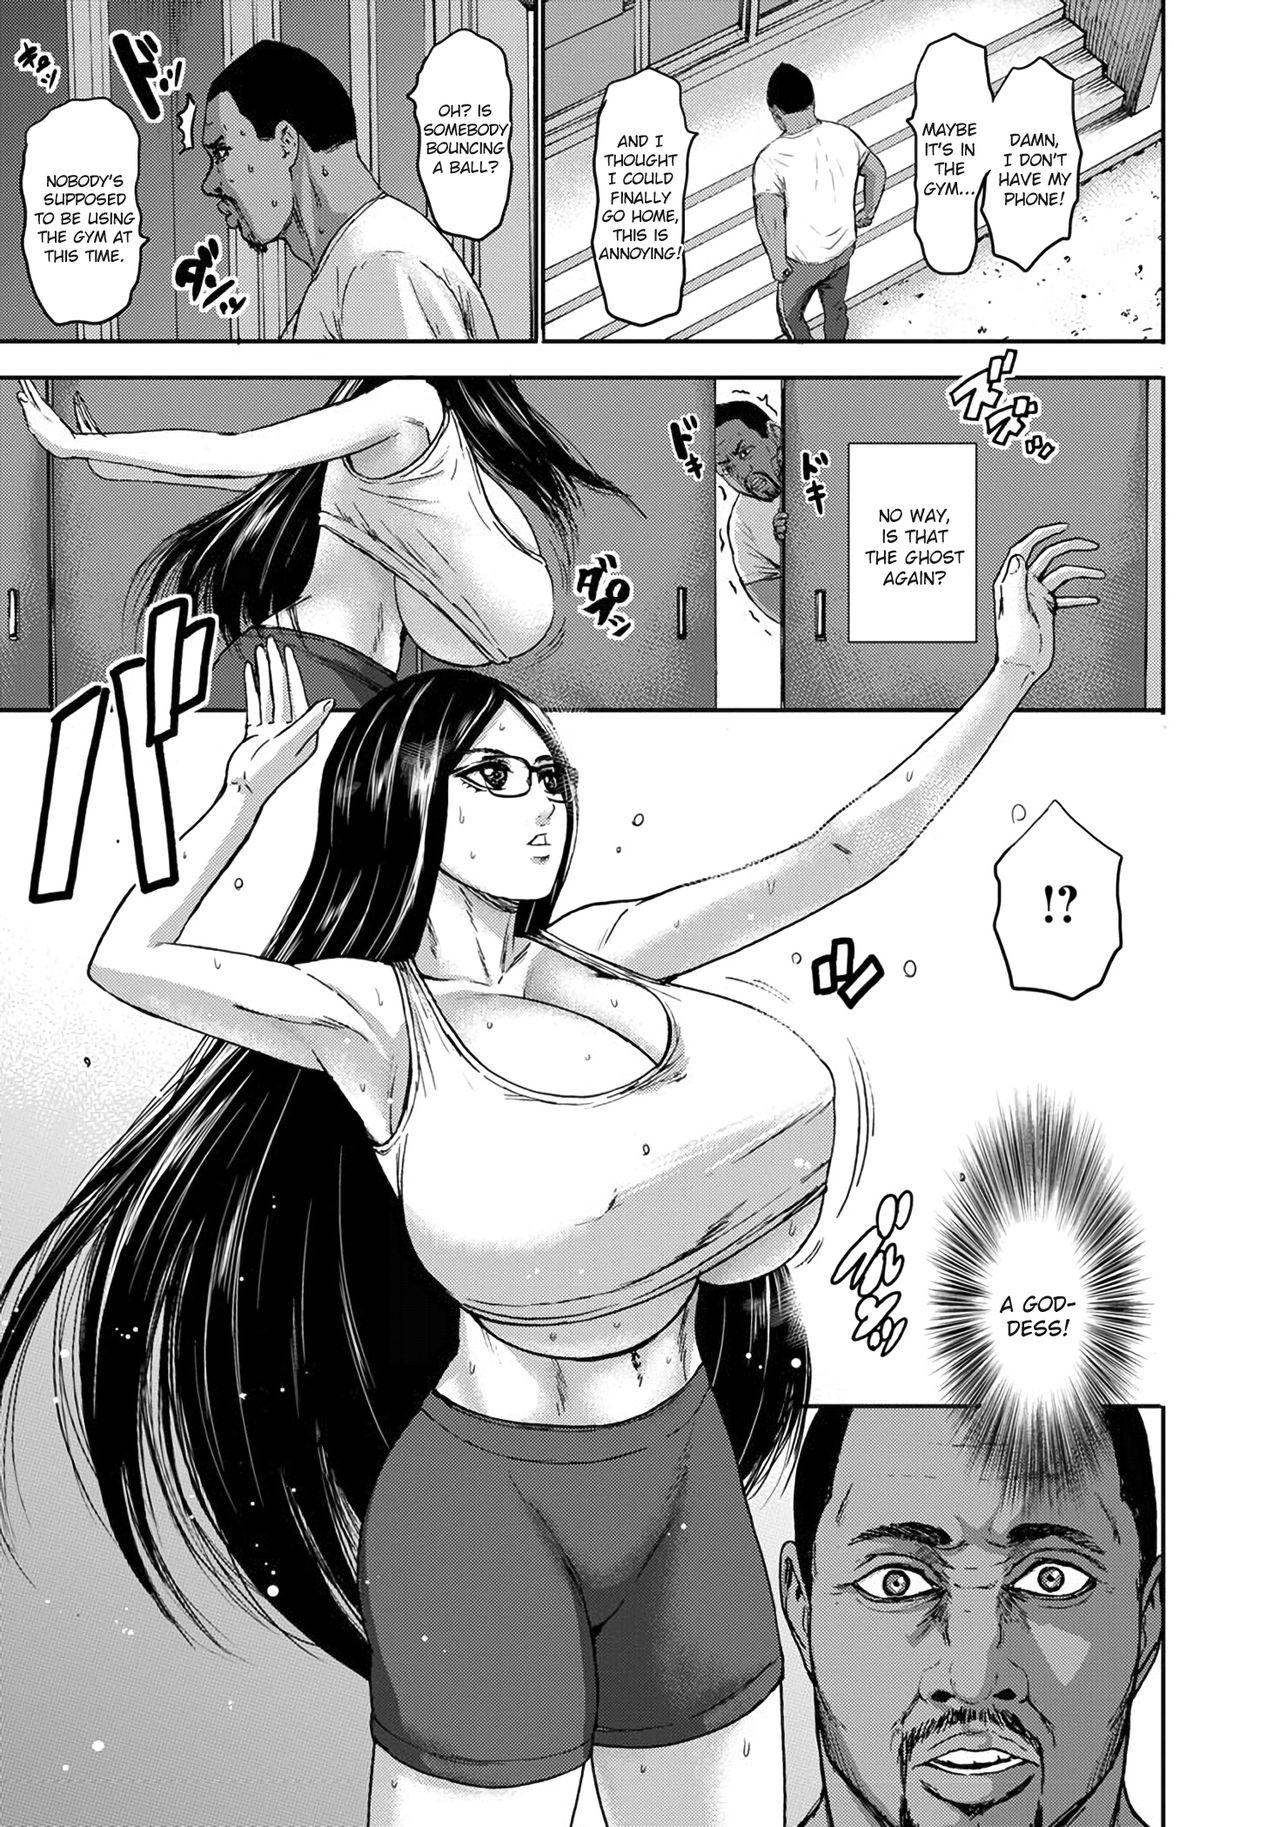 Amature Sex Chounyuu Gaiden | Academy for Huge Breasts - Side story Pussy Licking - Page 3